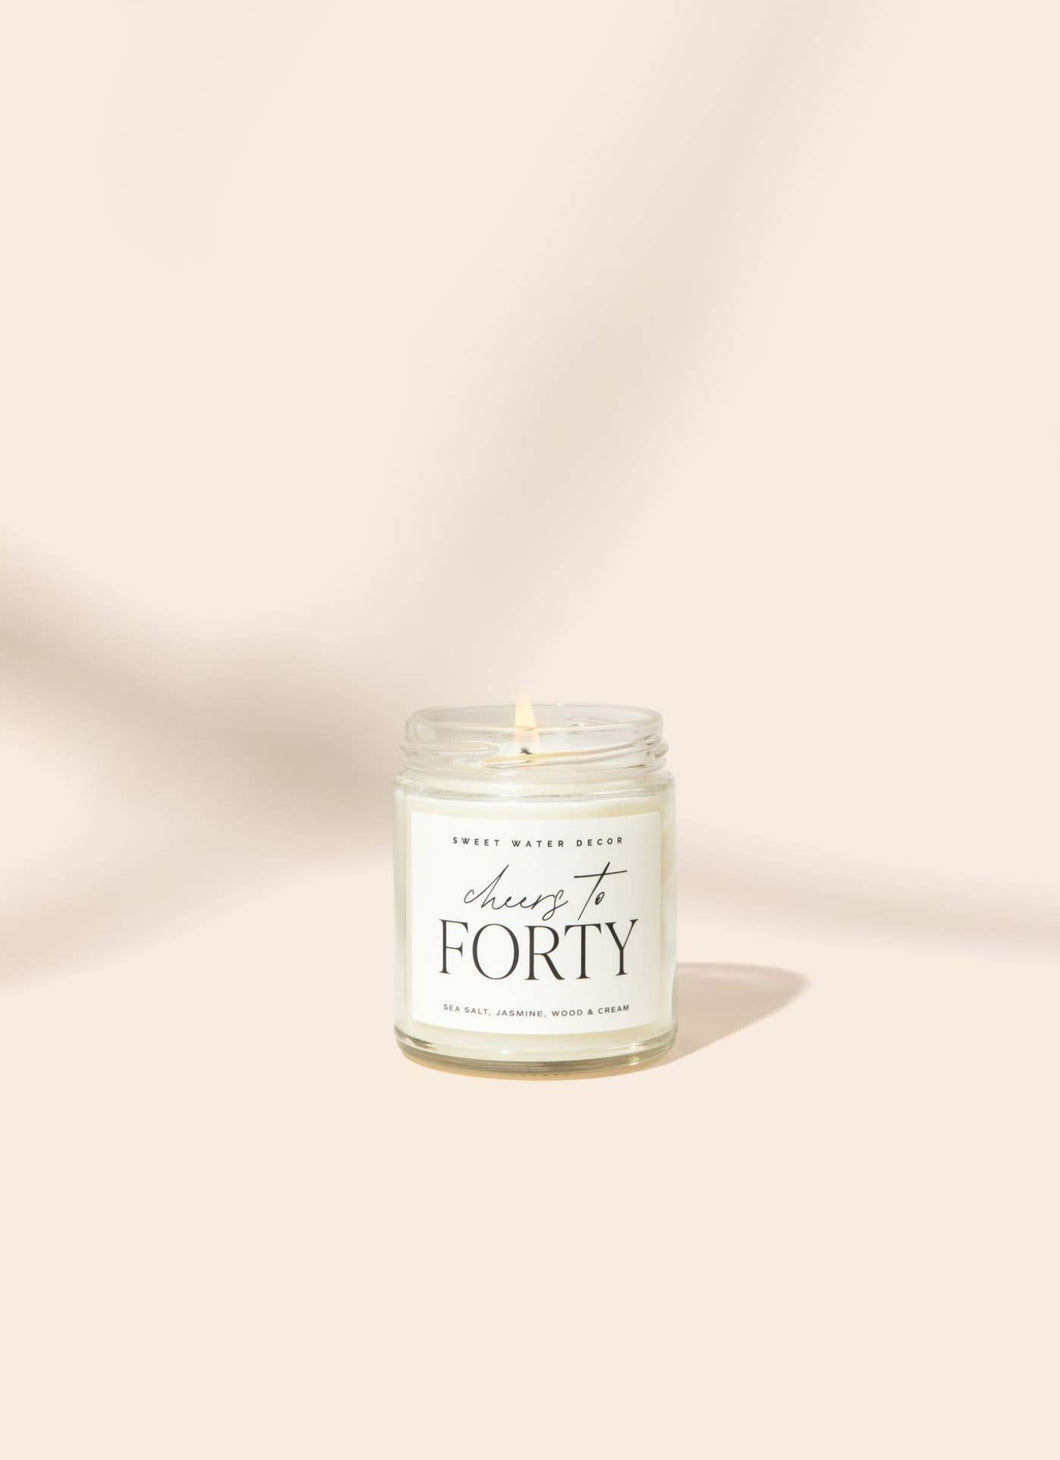 Cheers to Forty 9 oz Soy Candle - Home Decor & Gifts